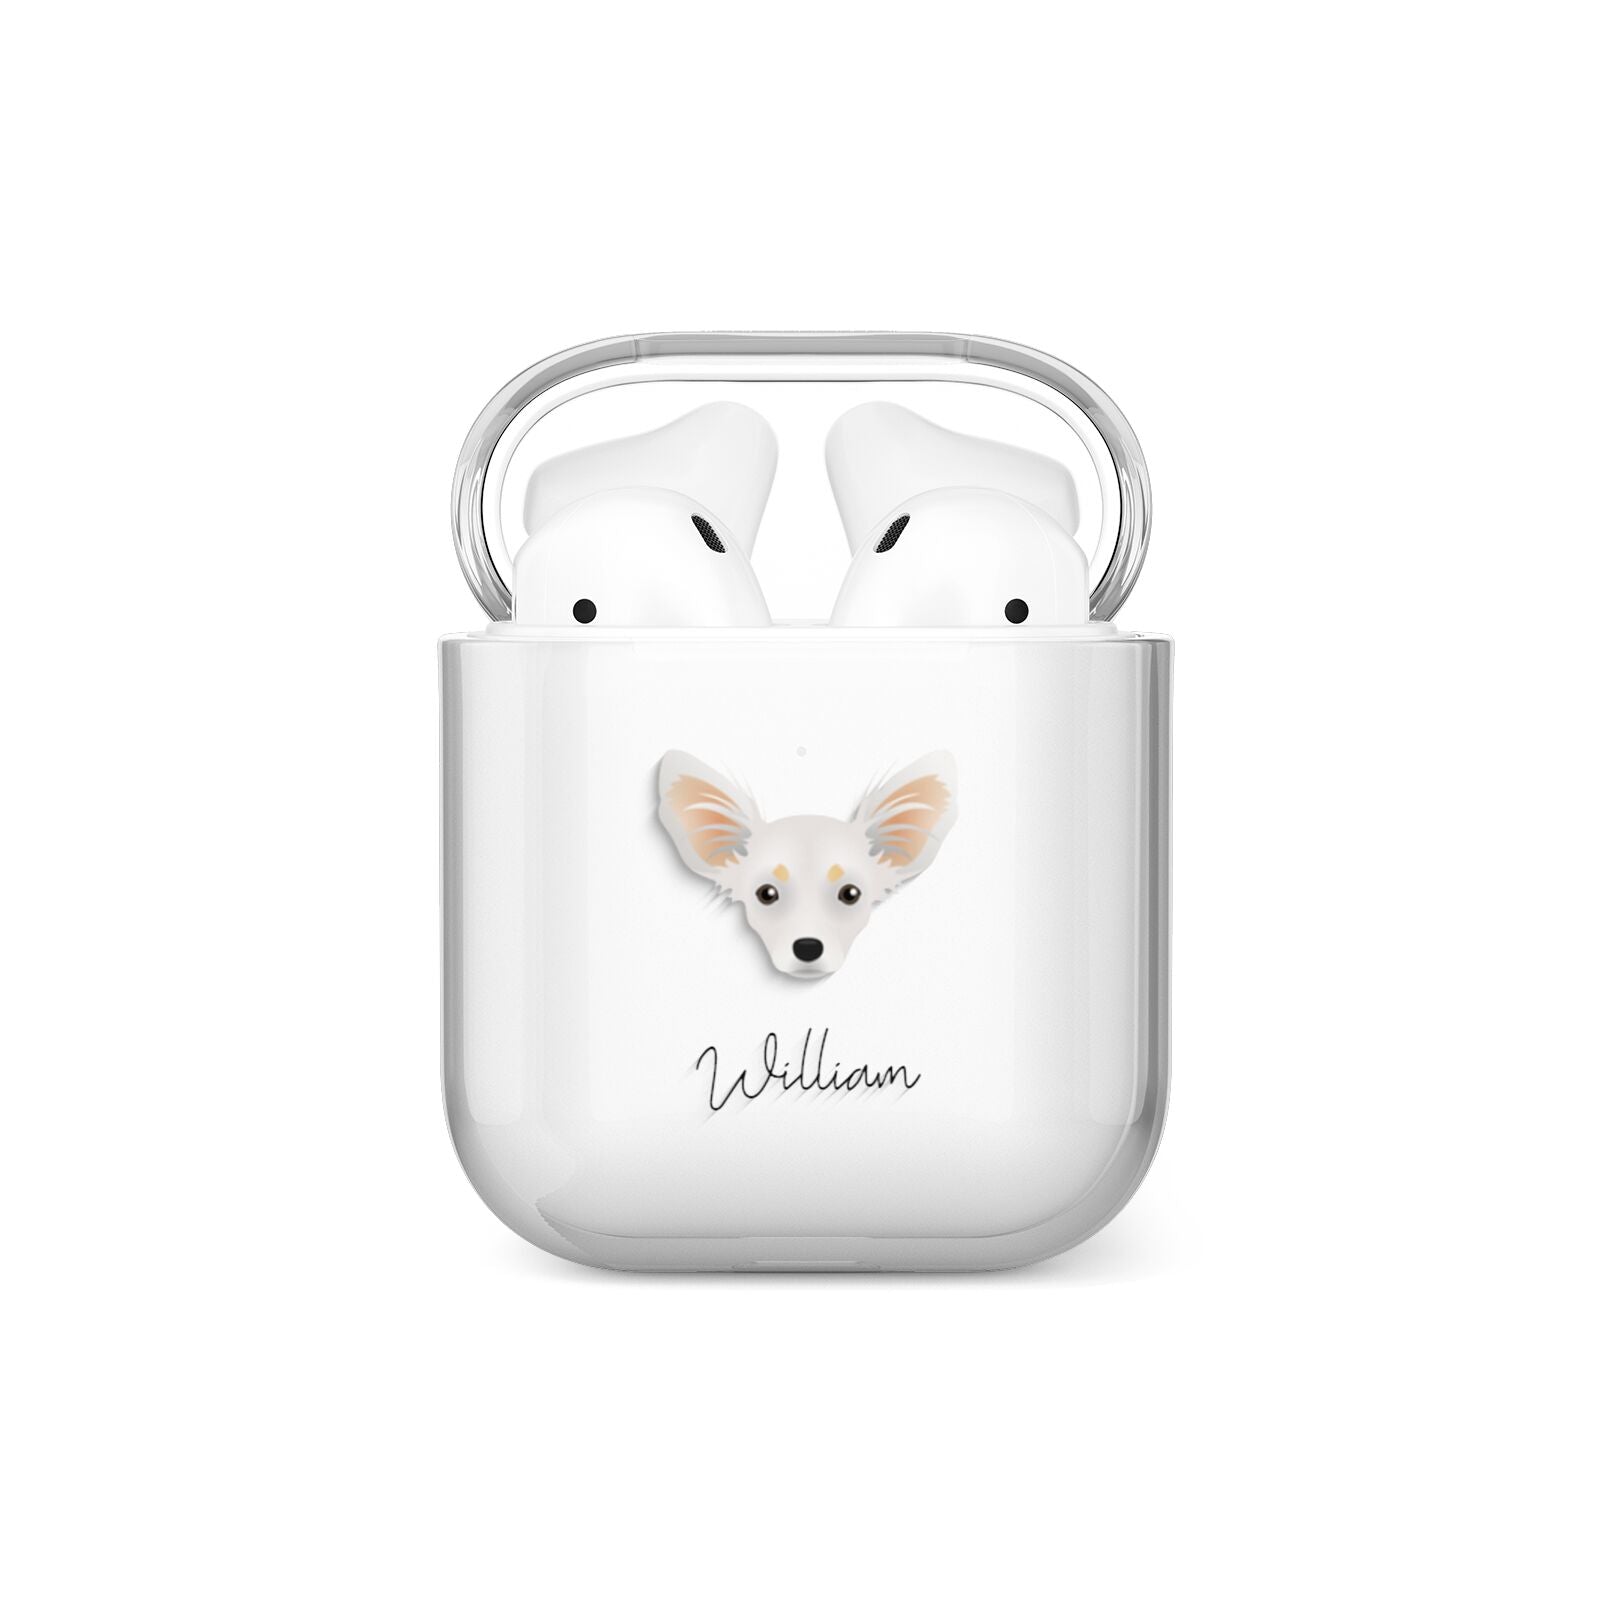 Russian Toy Personalised AirPods Case